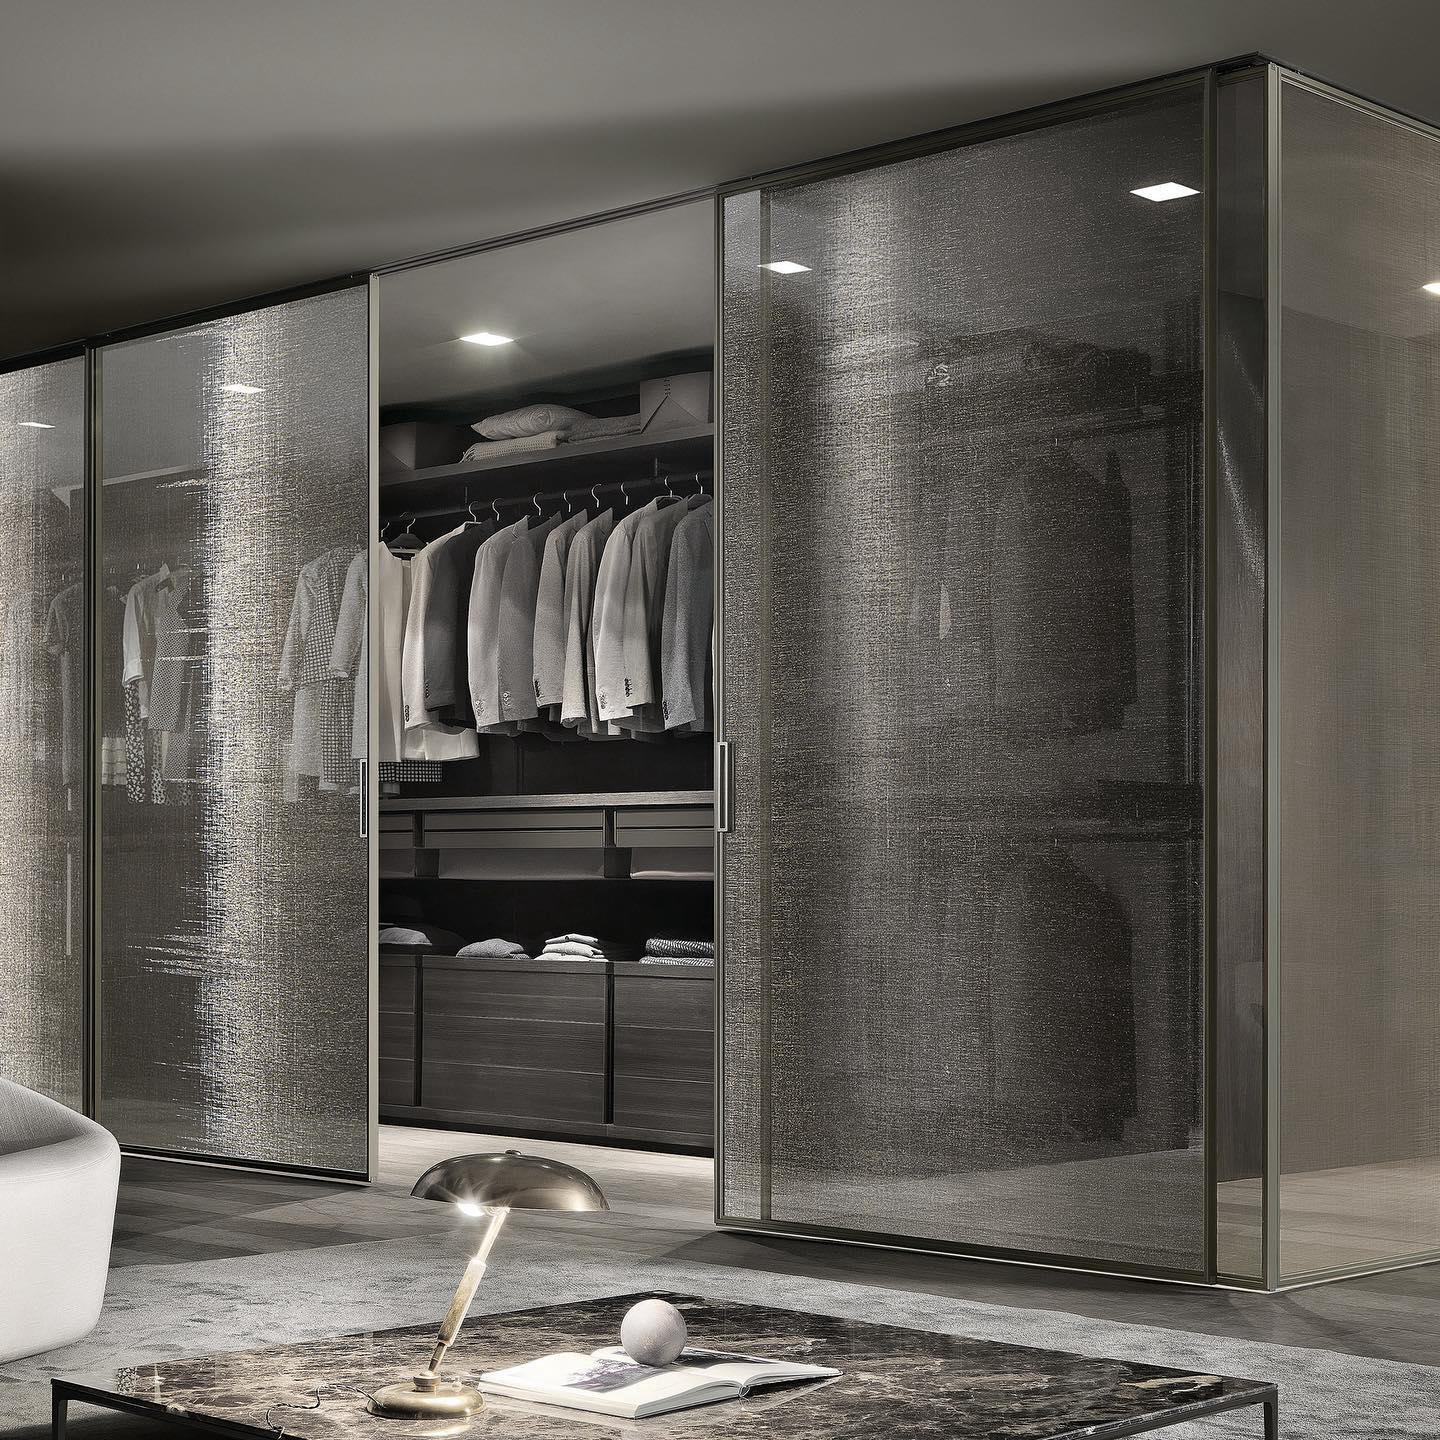 image  1 Pure Interiors - THE PERFECT WARDROBE ~ If you are looking for luxurious pieces to transform your ho